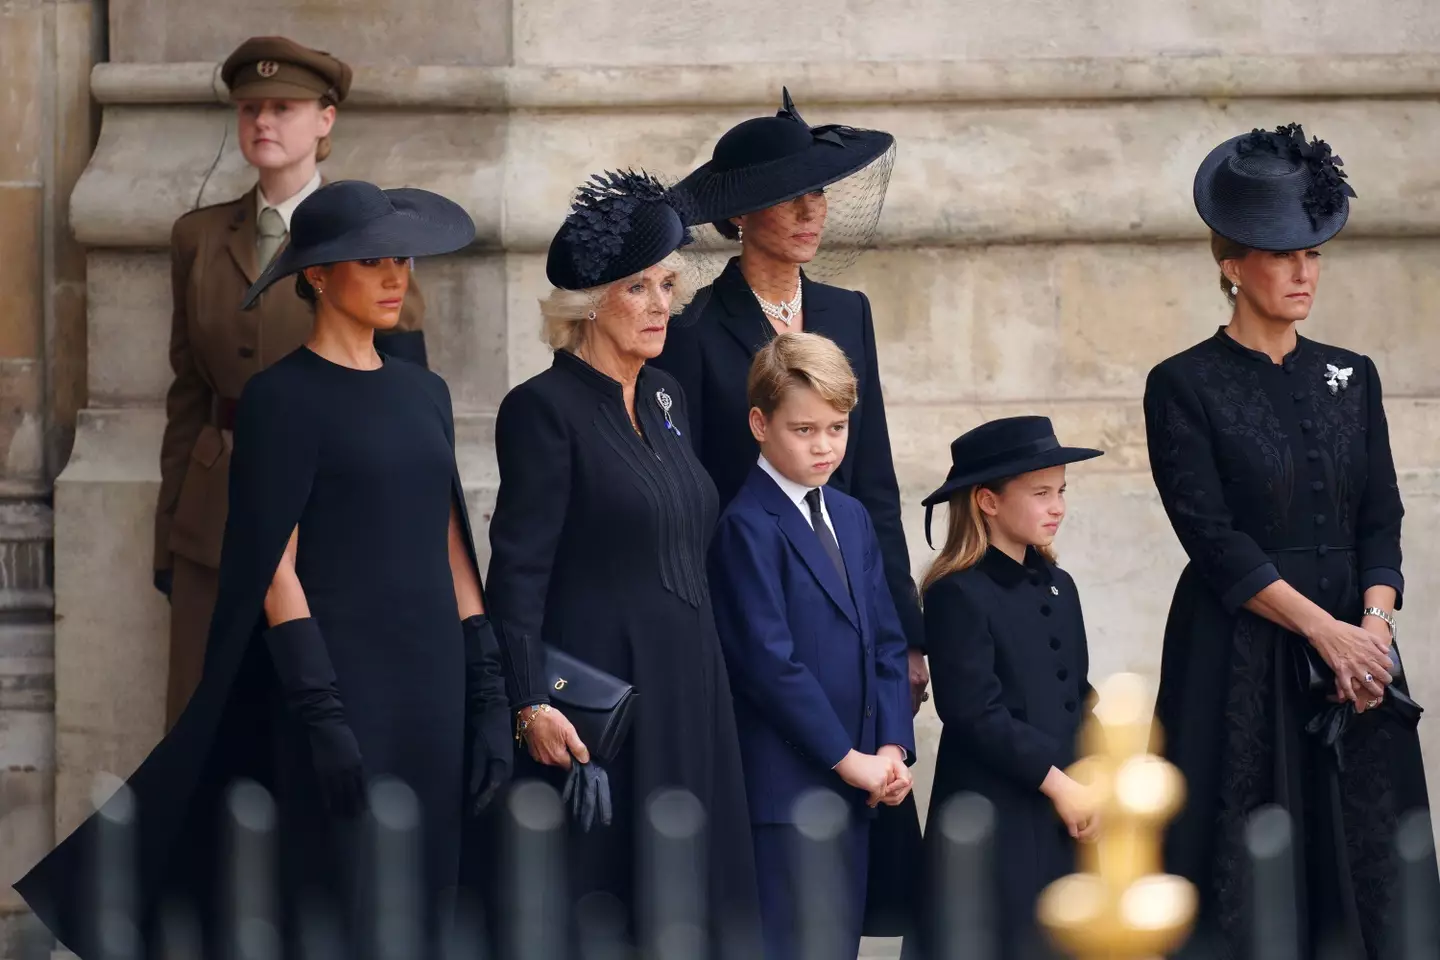 Members of the royal family gathered for the funeral of Queen Elizabeth II earlier today, including Meghan Markle.